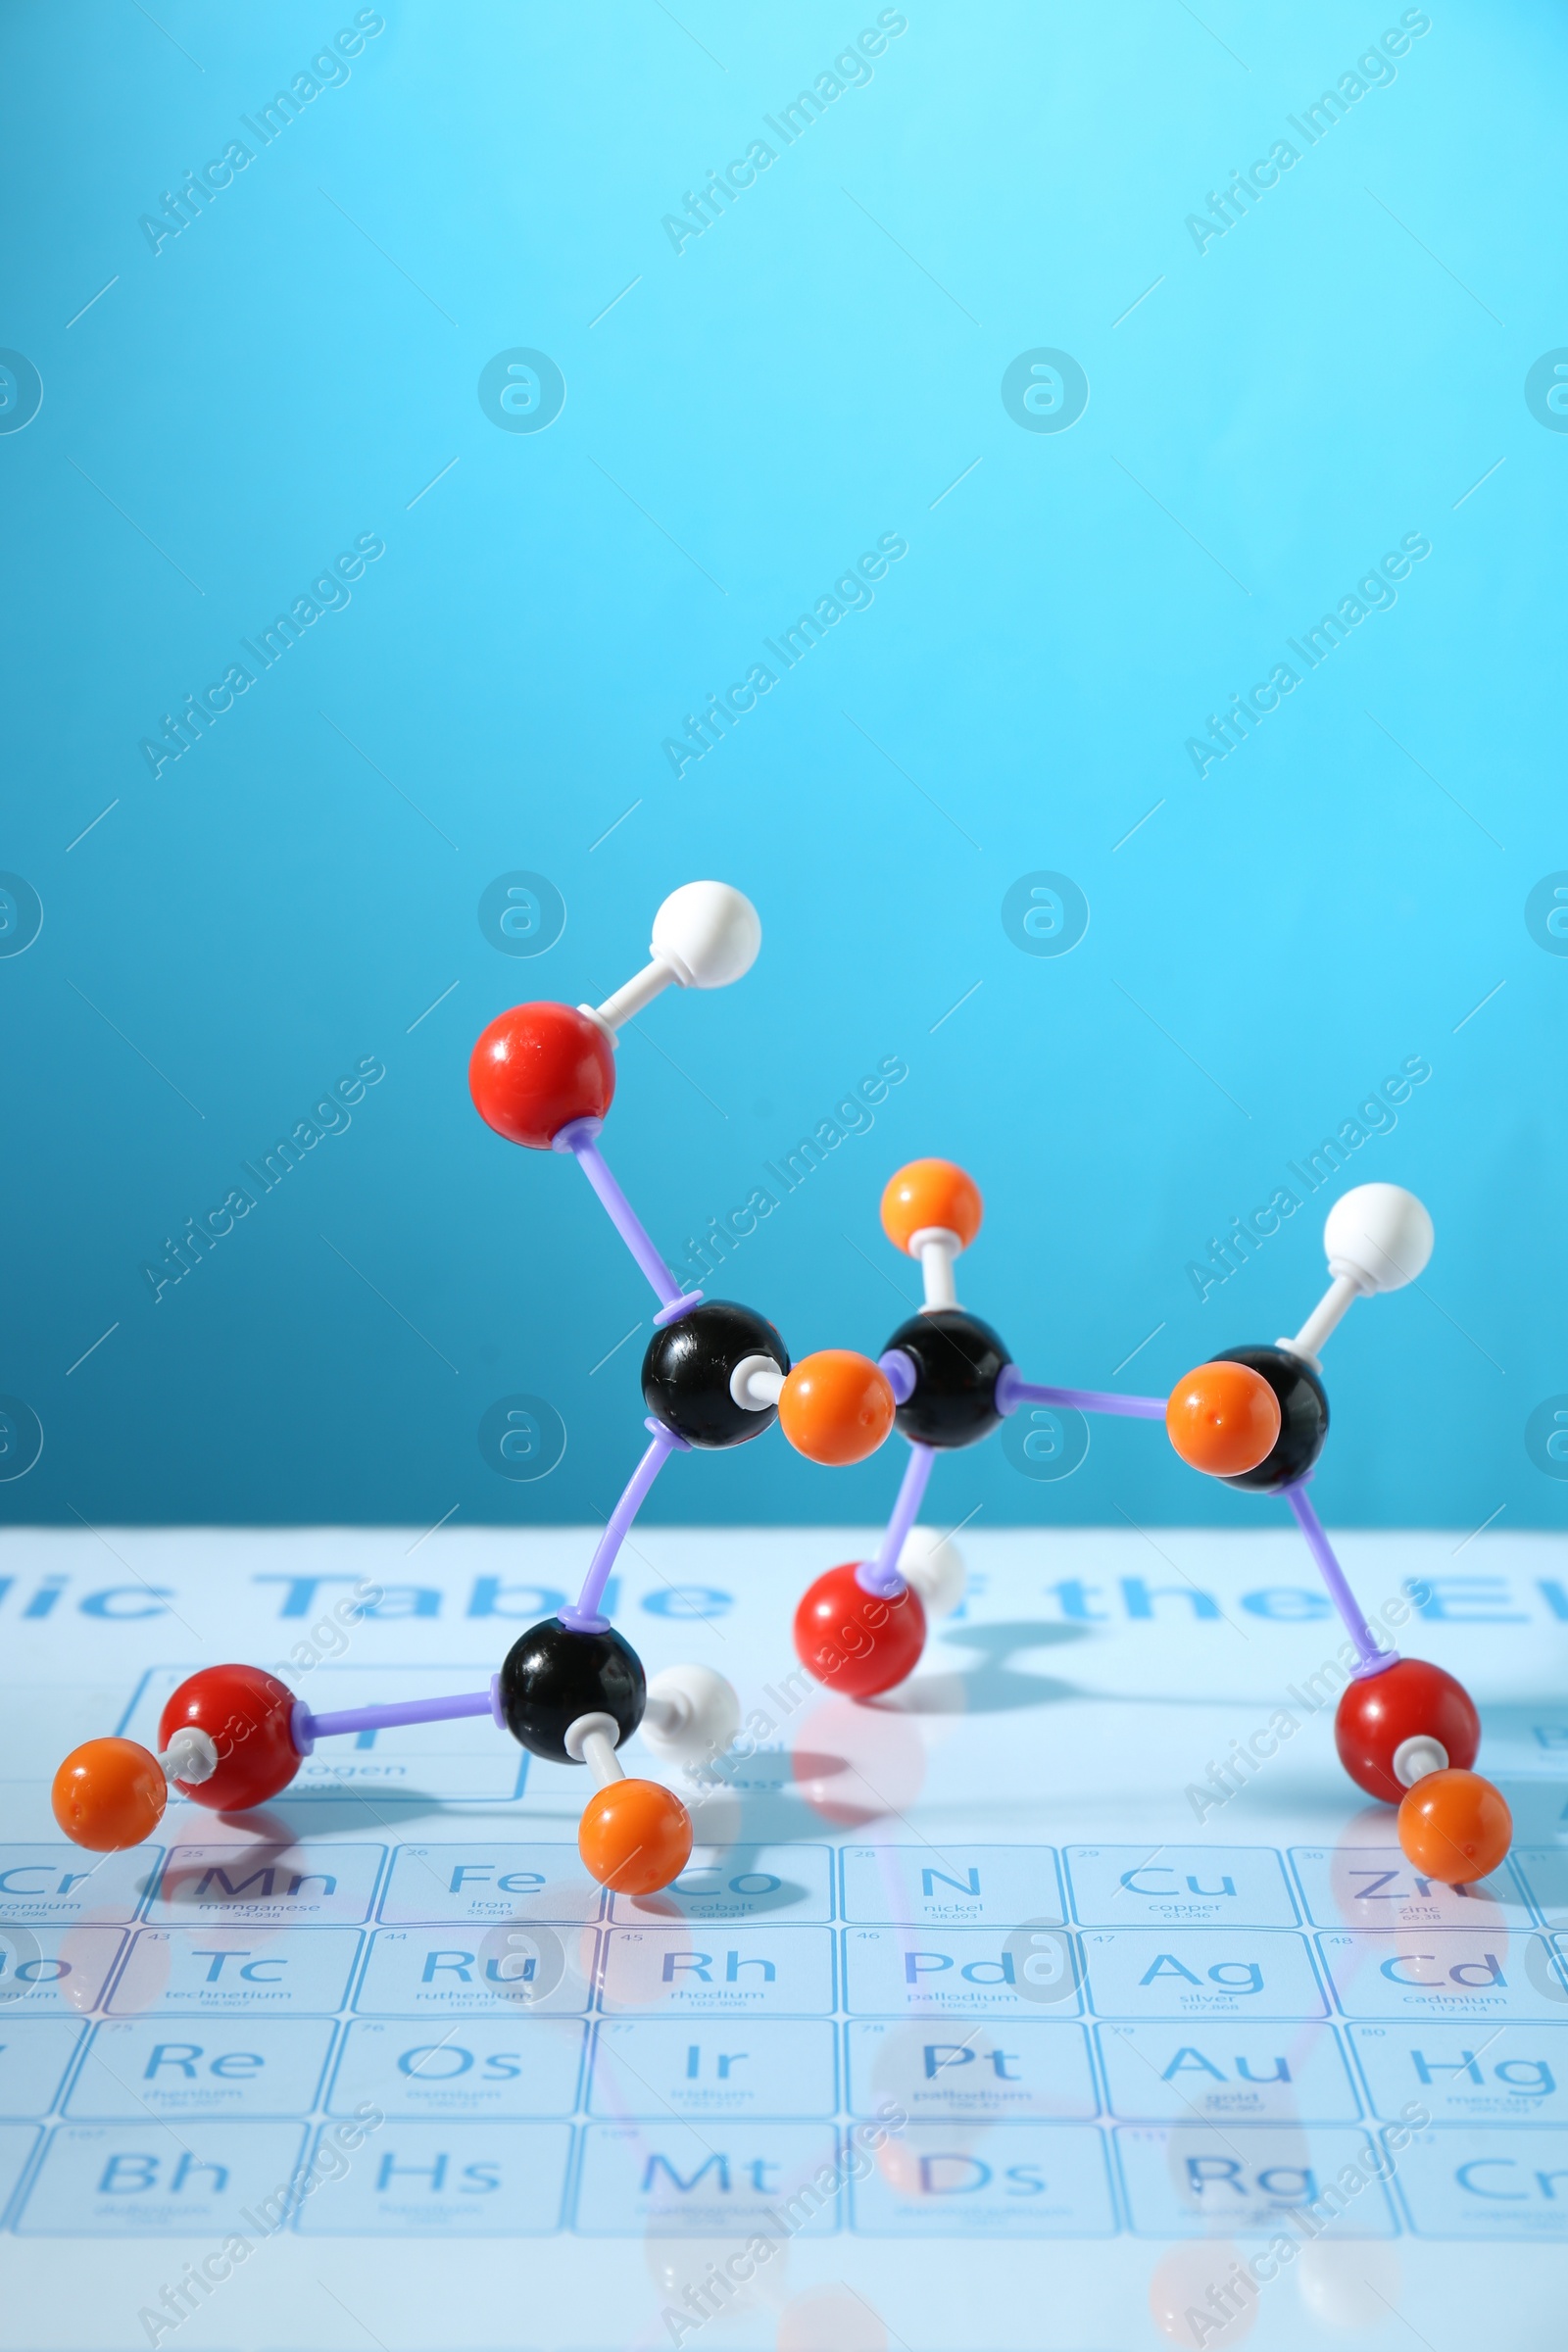 Photo of Molecular model on periodic table against light blue background